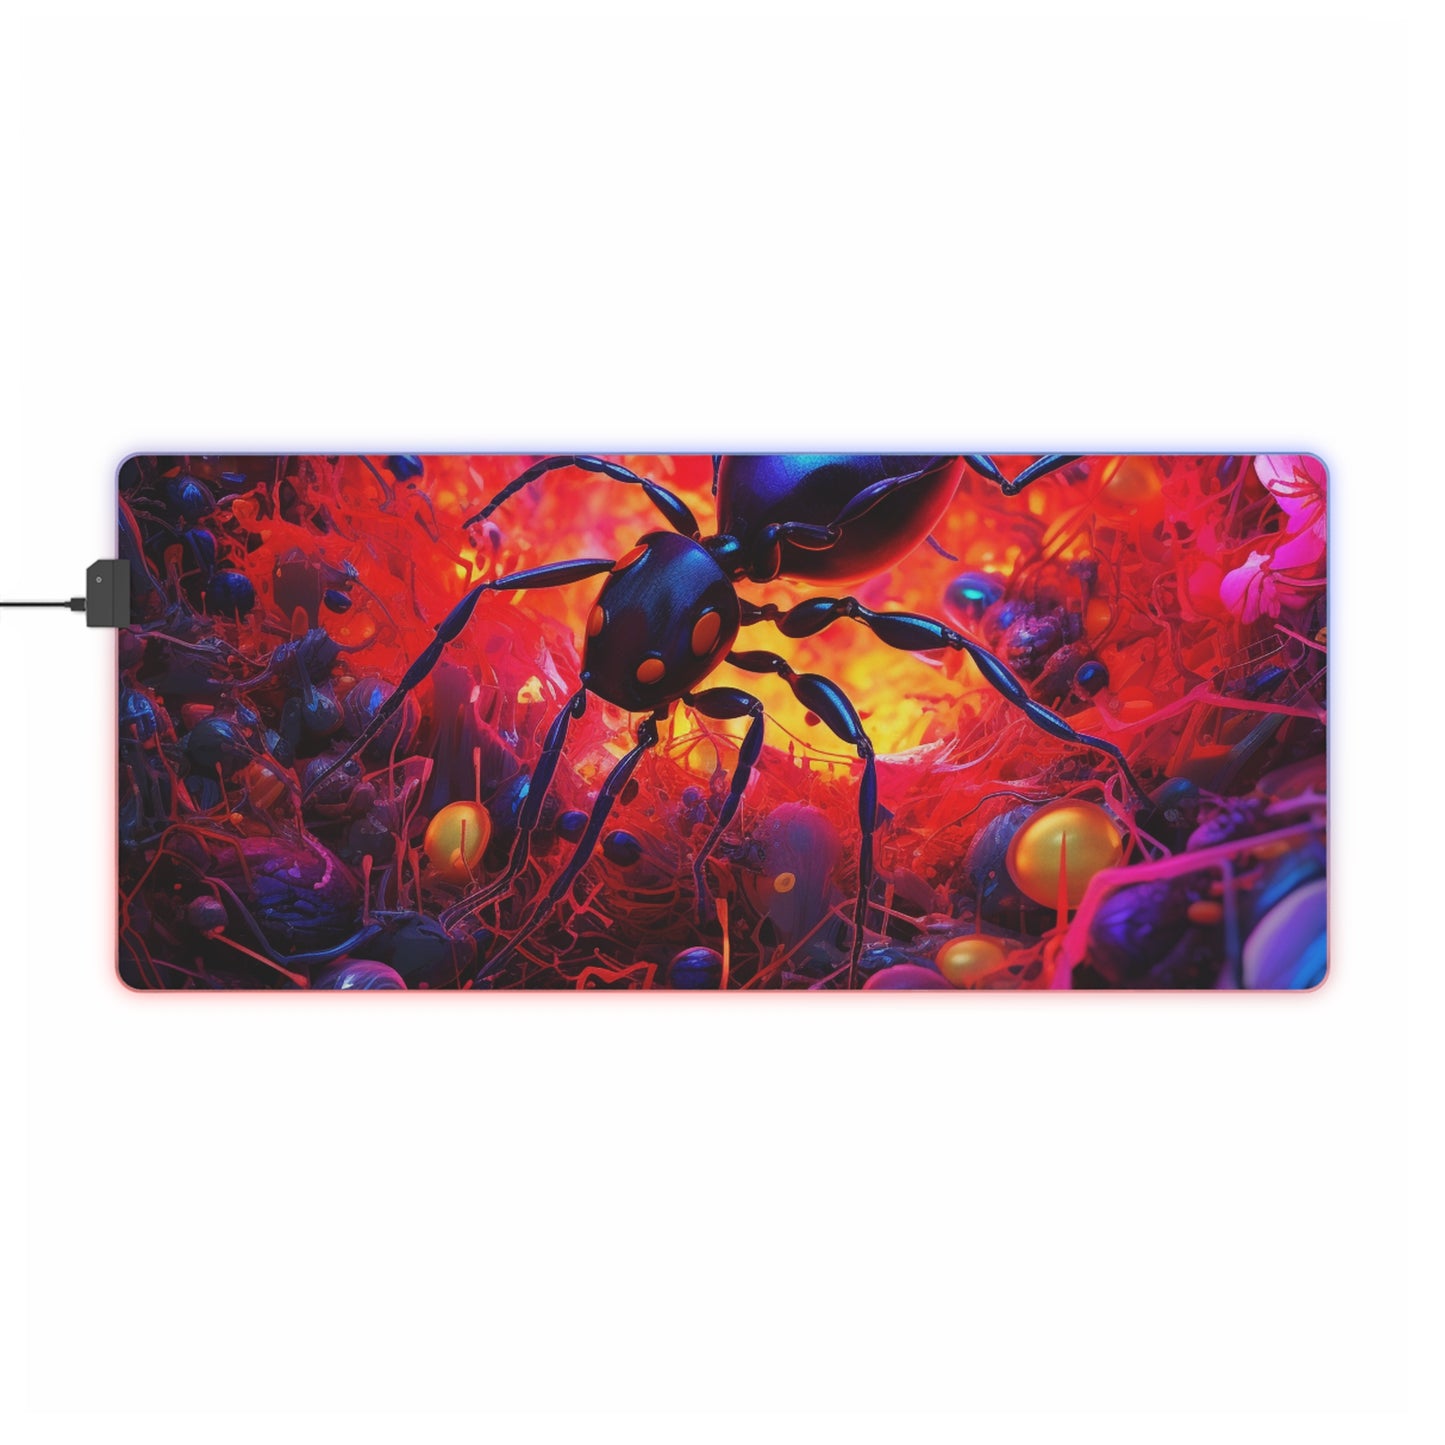 LED Gaming Mouse Pad Ants Home 1